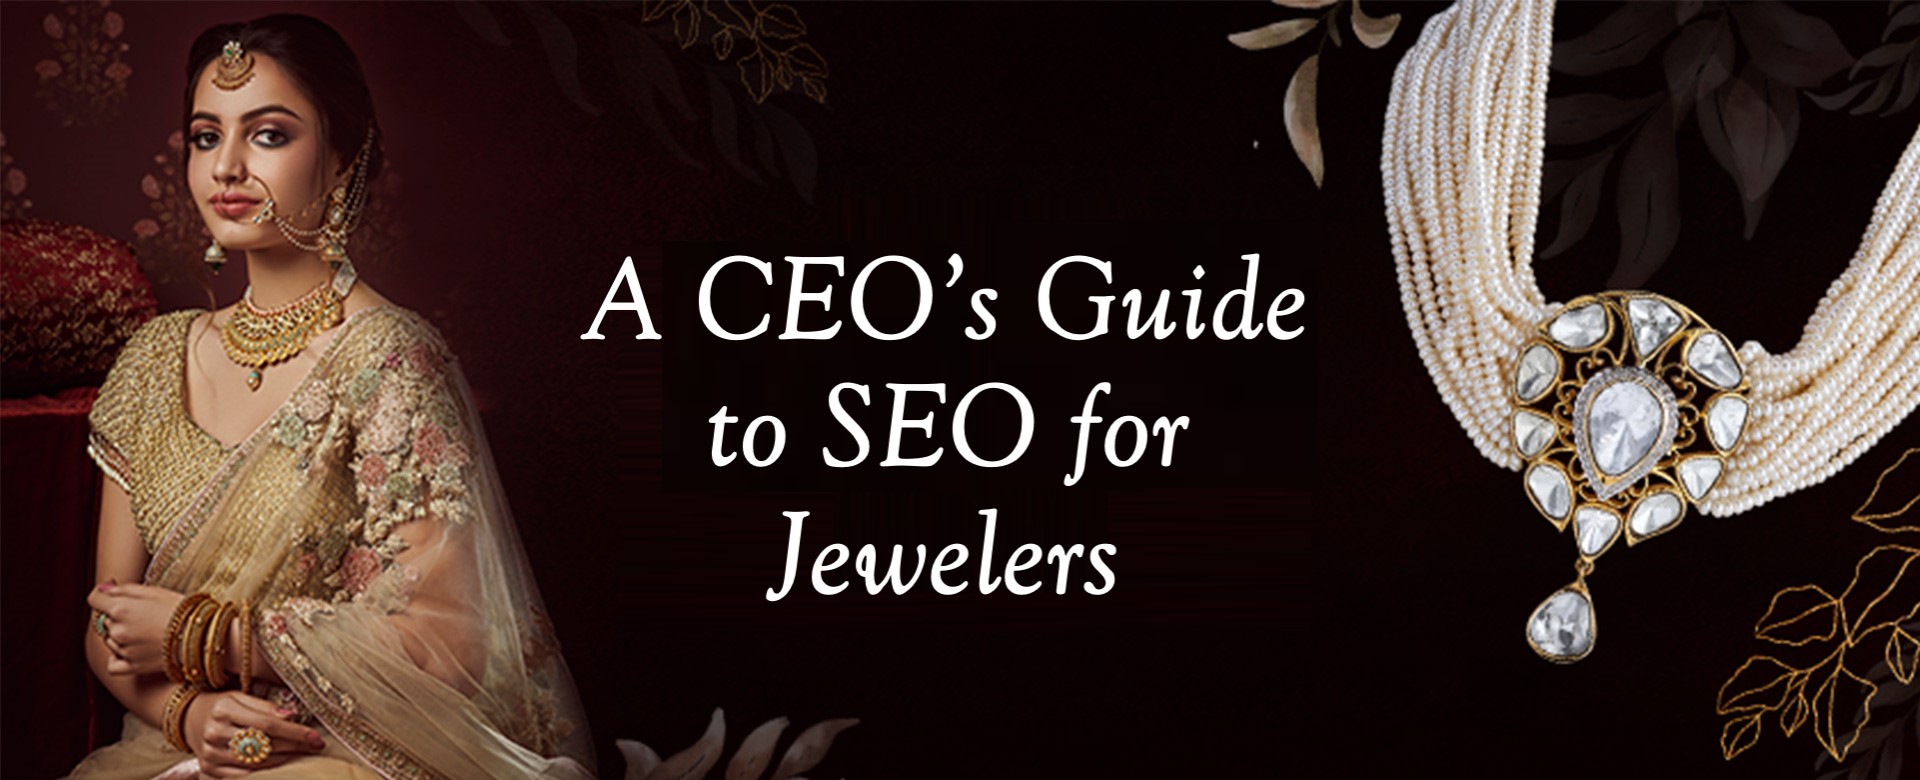 A CEO’s Guide to SEO for Jewelers